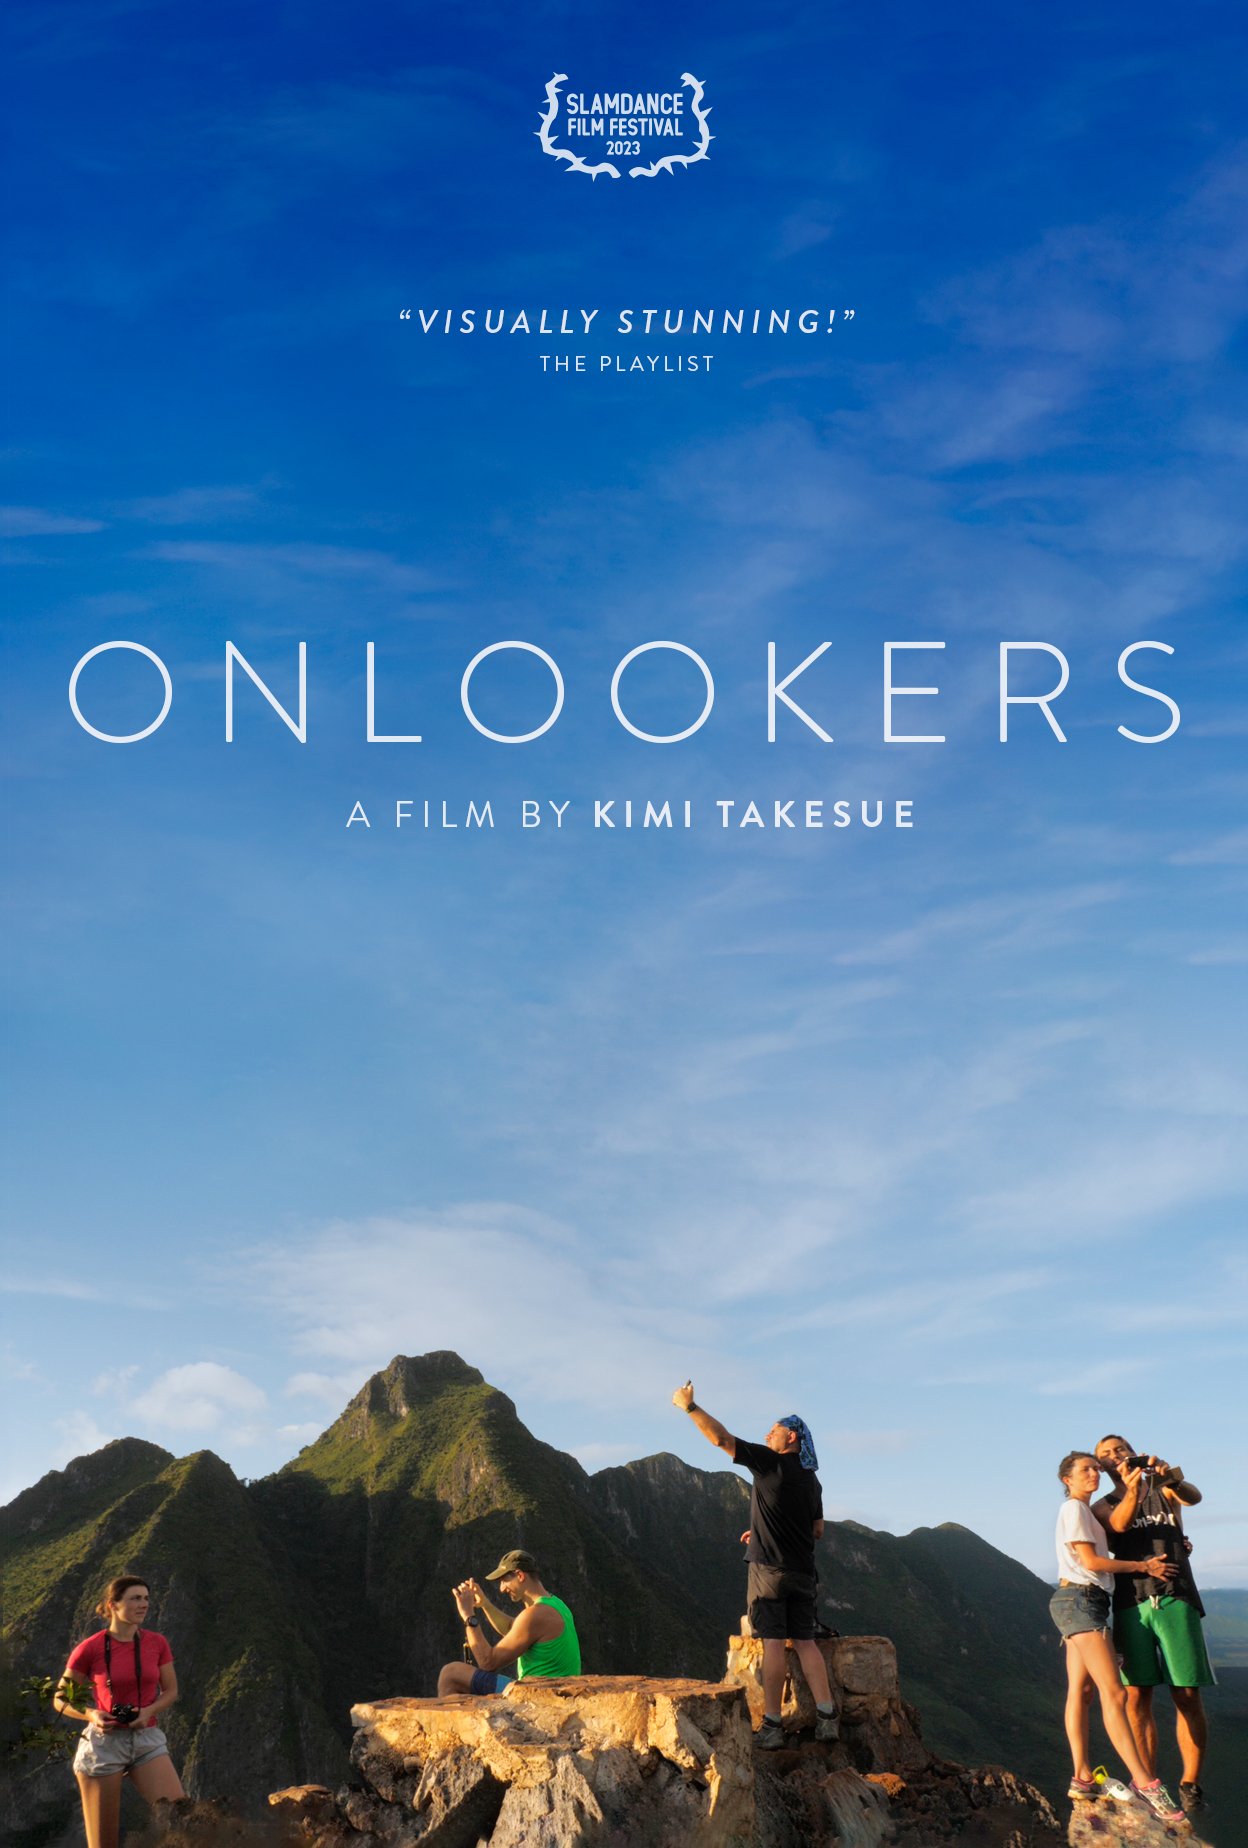 Pictured: the poster for Onlookers